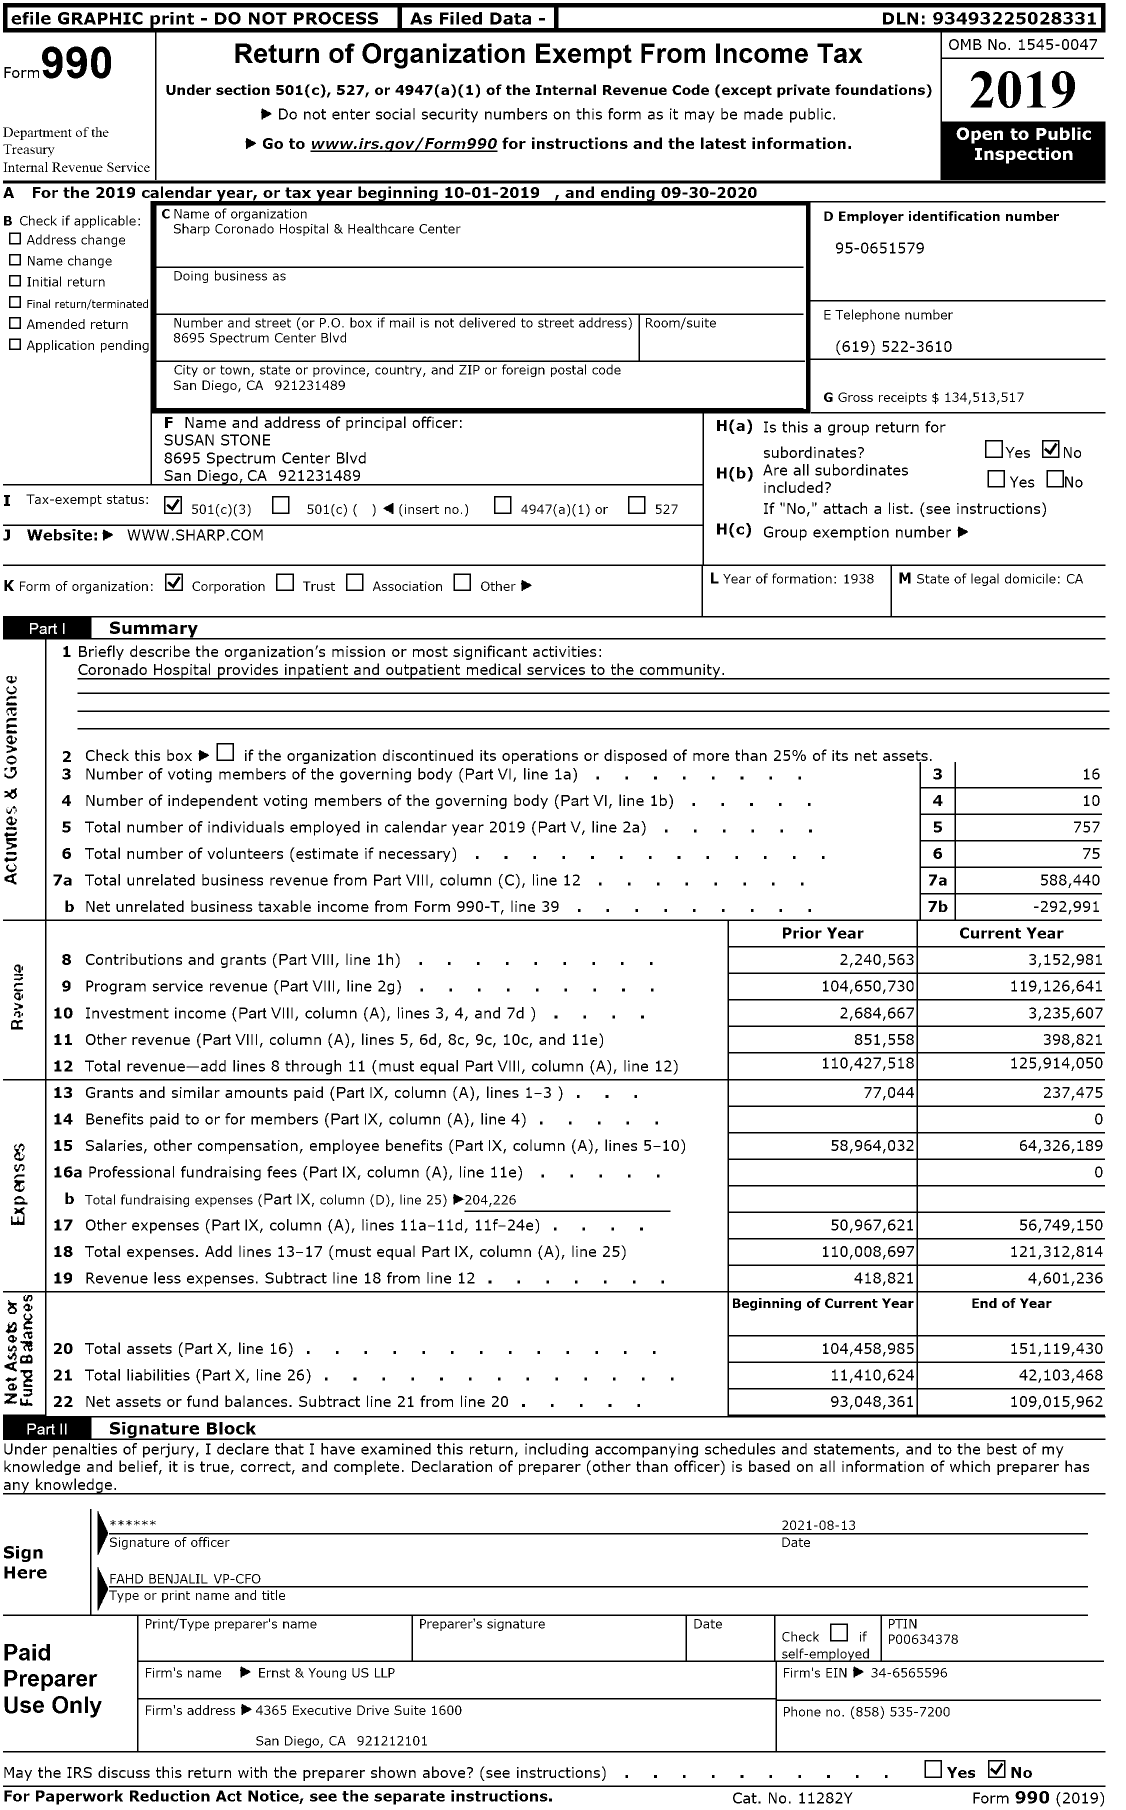 Image of first page of 2019 Form 990 for Sharp Coronado Hospital and Healthcare Center